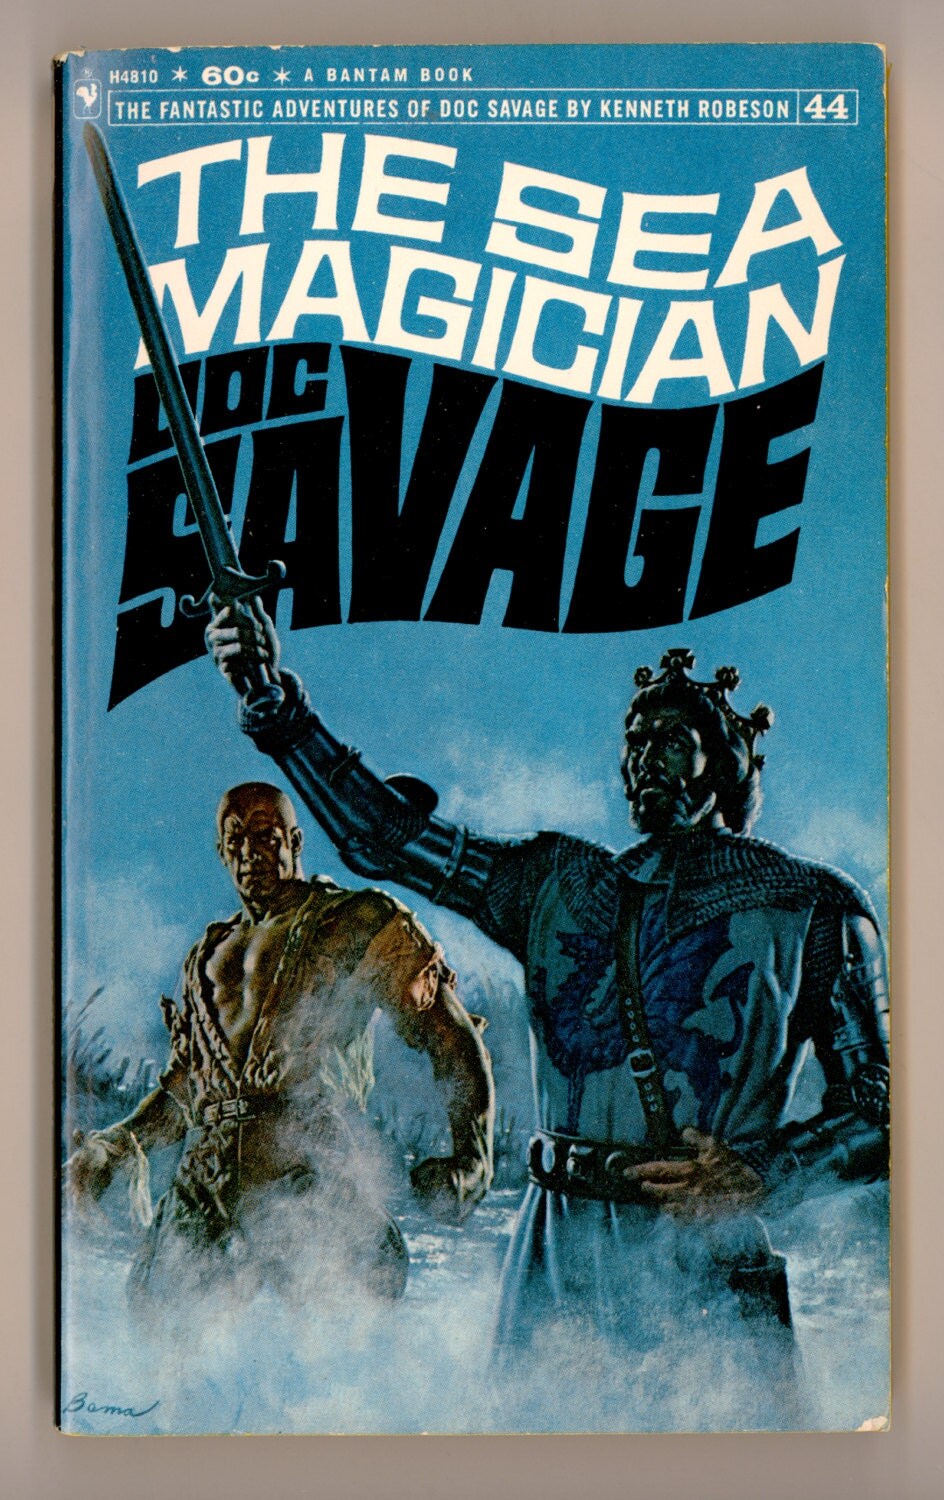 Doc Savage 44 The Sea Magician By Kenneth Robeson 1970 Bantam